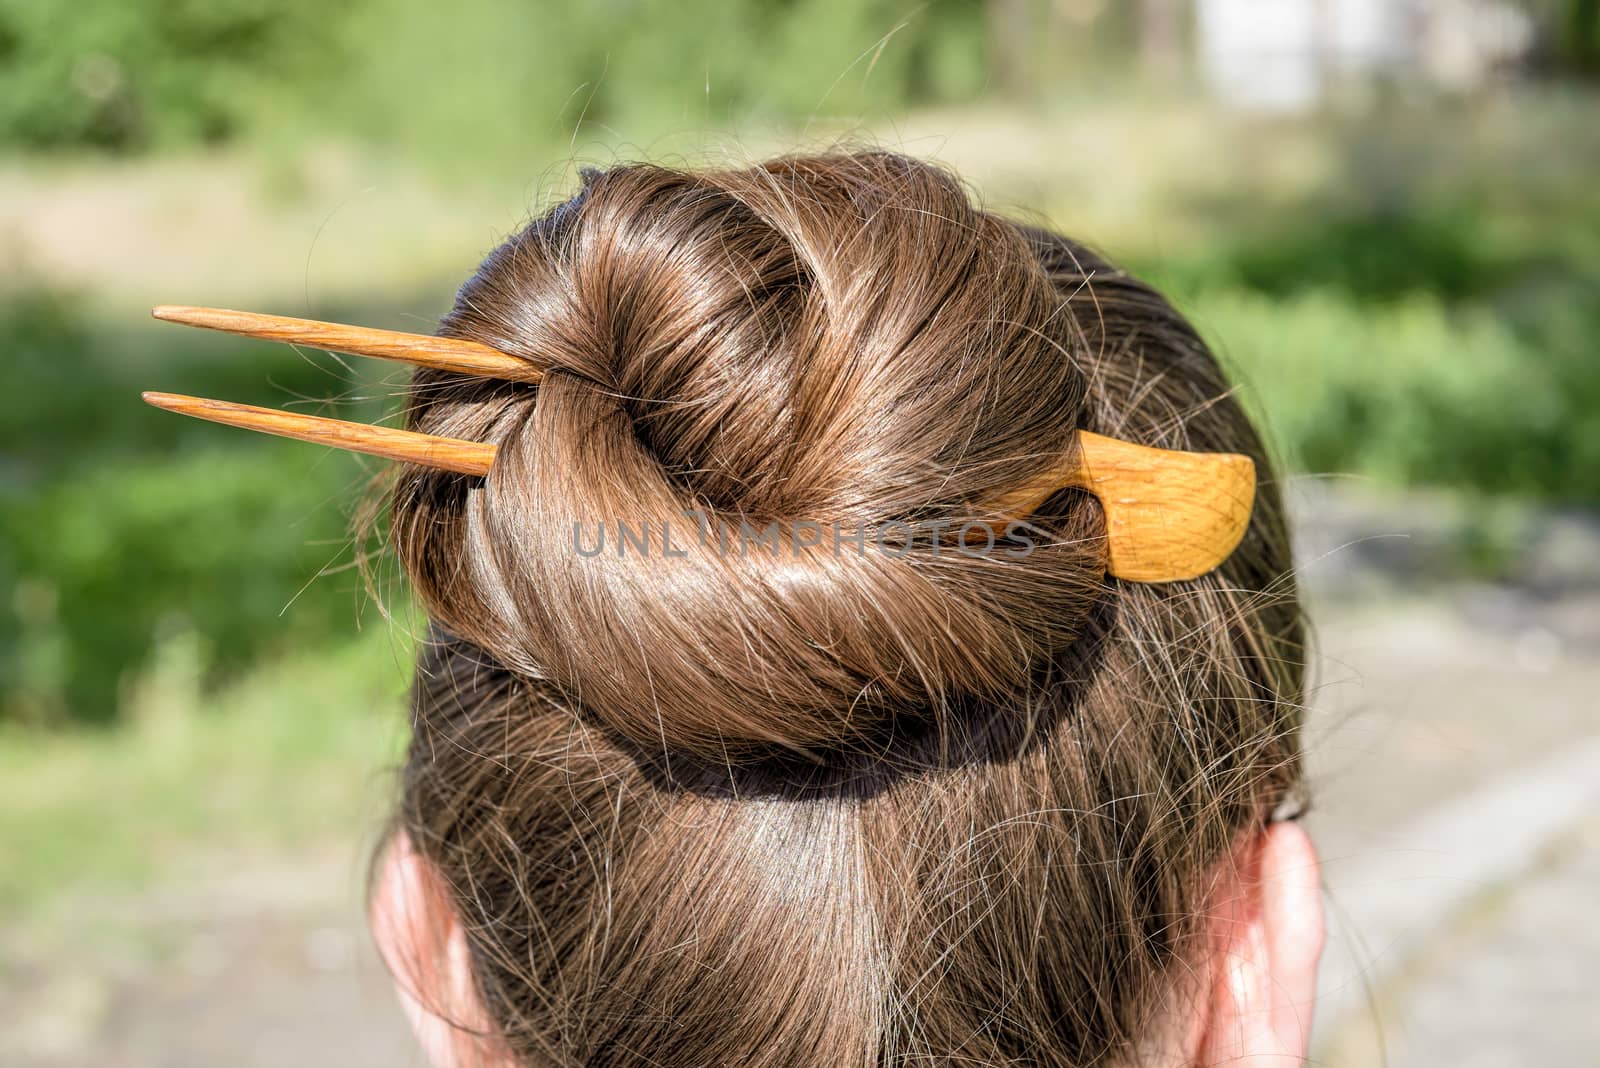 Detail of a chignon with a wooden hairpin to keep the hair attached together